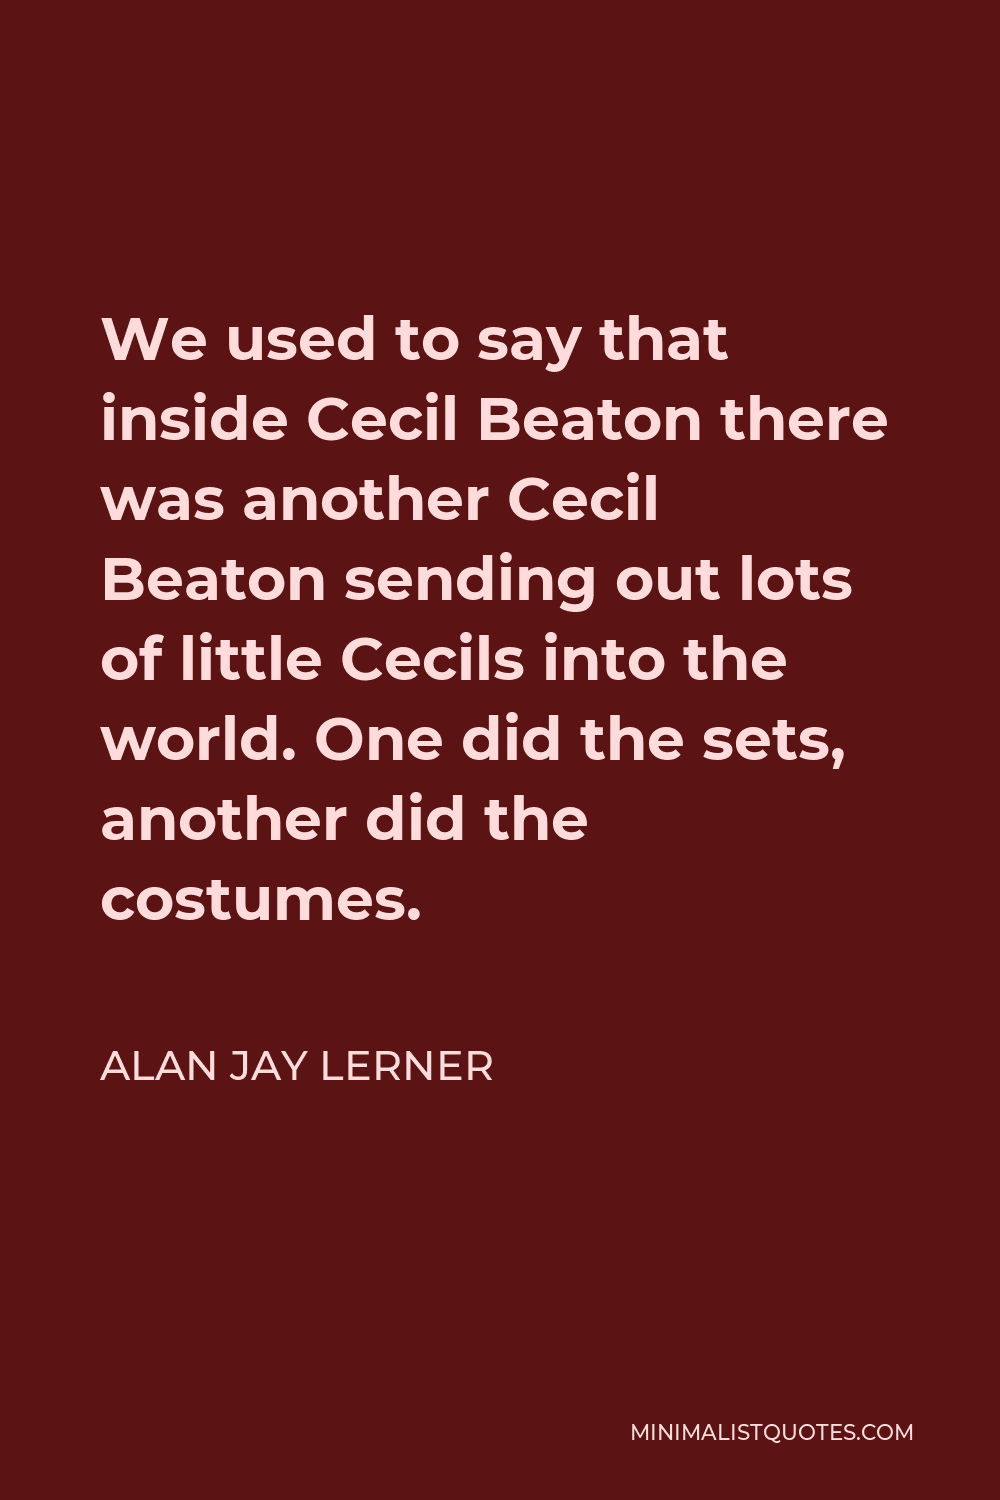 Alan Jay Lerner Quote - We used to say that inside Cecil Beaton there was another Cecil Beaton sending out lots of little Cecils into the world. One did the sets, another did the costumes.